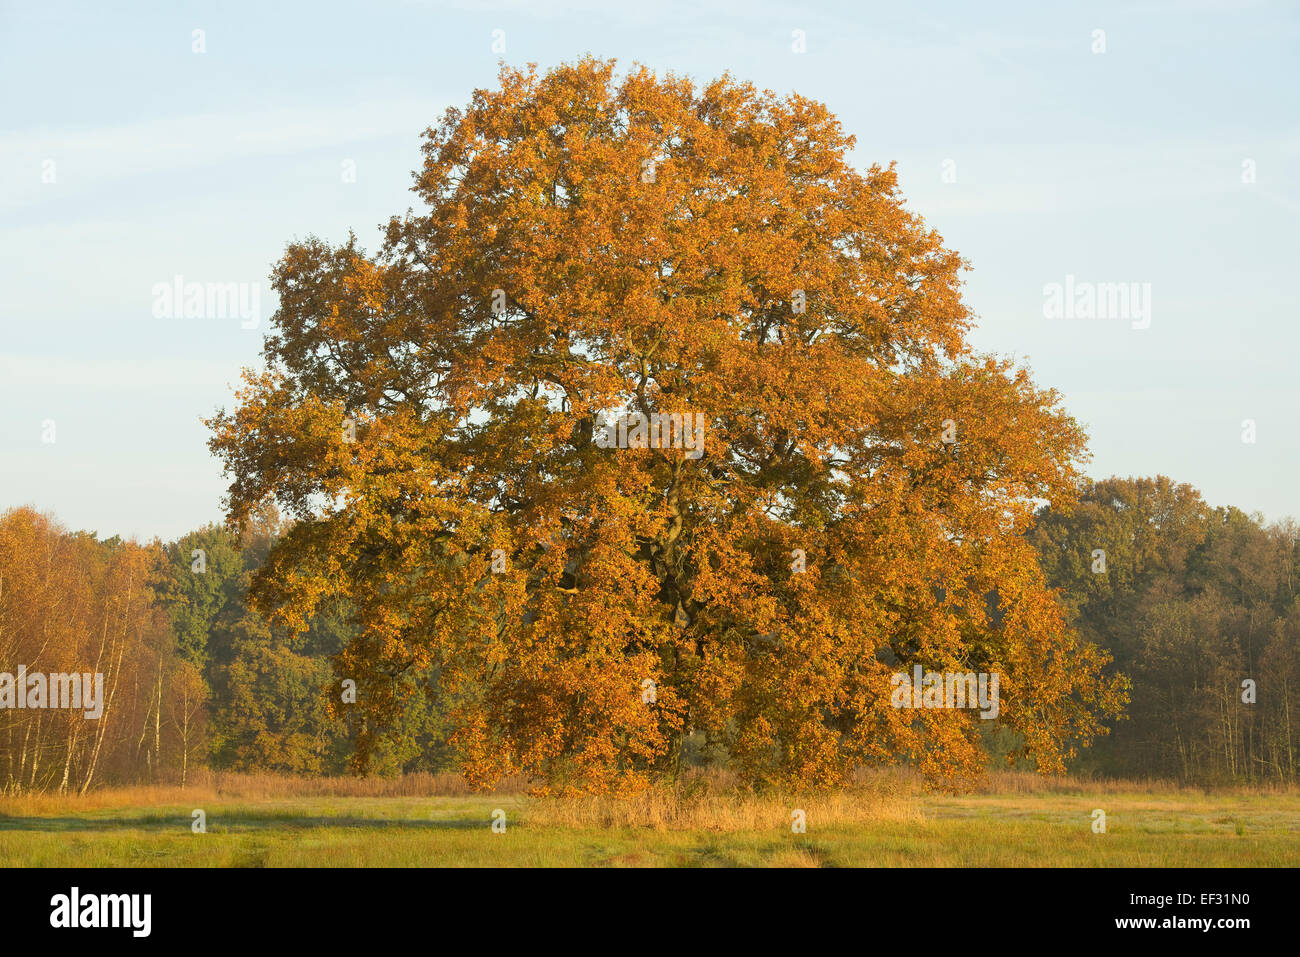 Solitary Pedunculate Oak (Quercus robur) in autumn, in early morning light, Lower Saxony, Germany Stock Photo